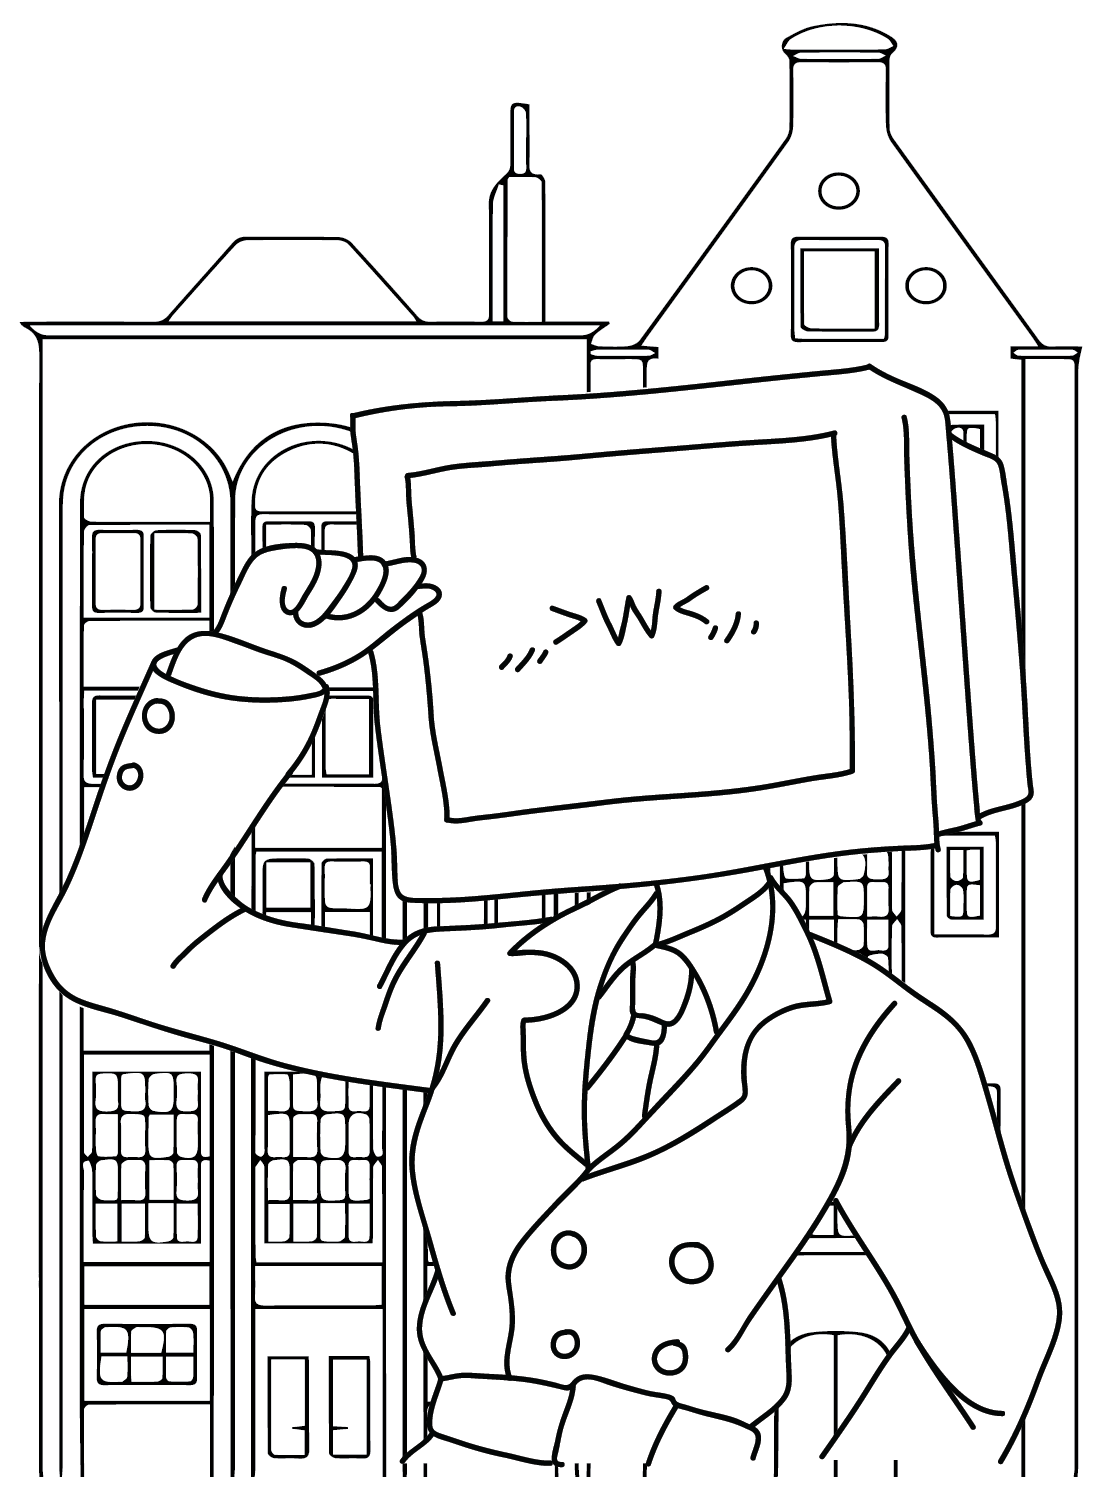 Tv man coloring pages